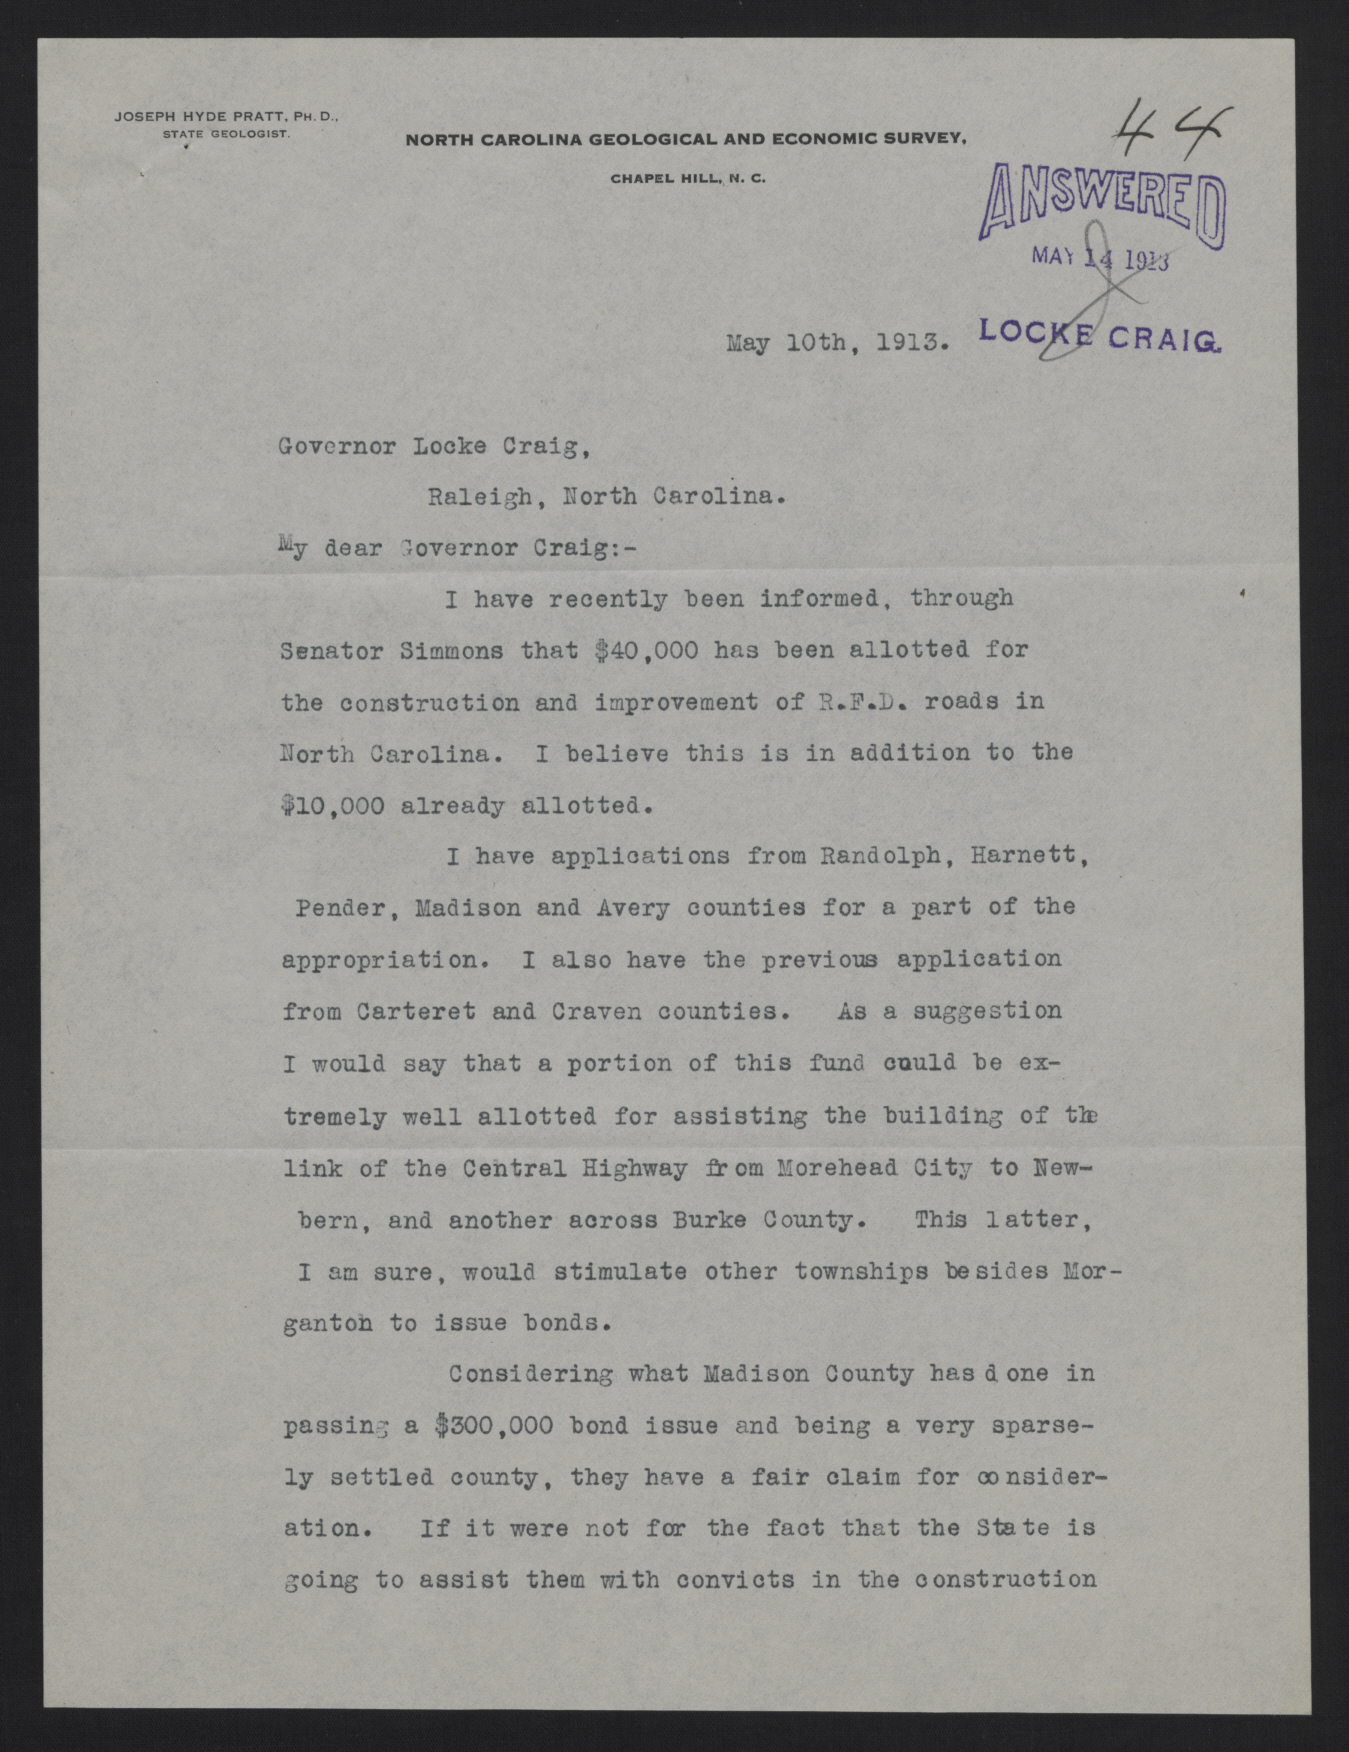 Letter from Pratt to Craig, May 10, 1913, page 1